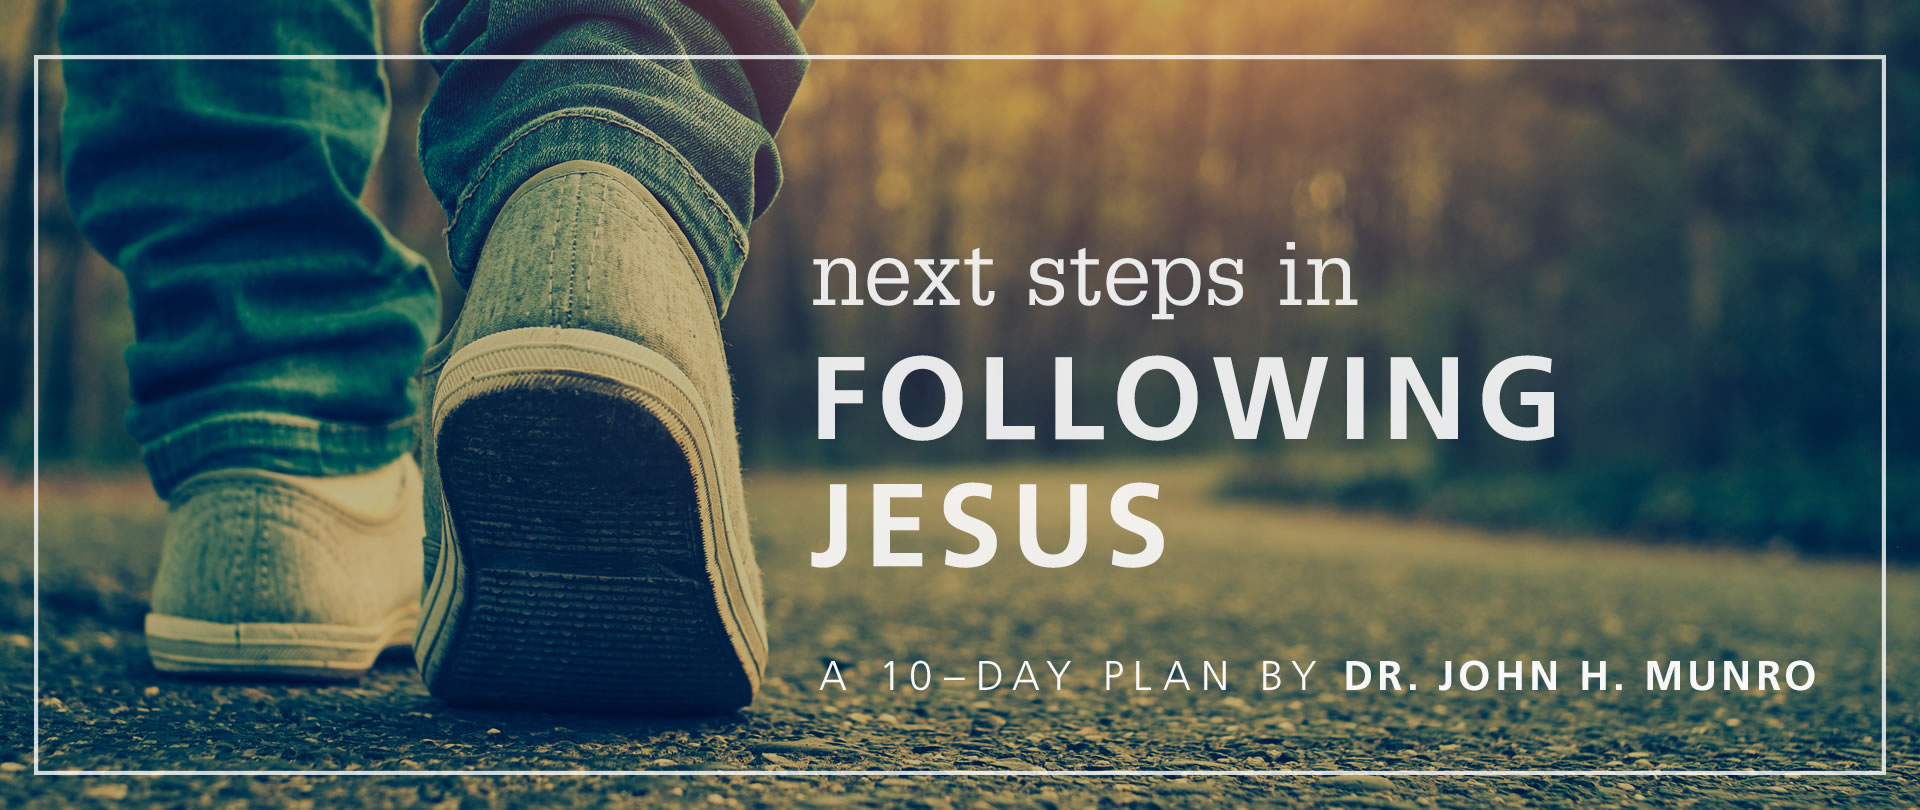 Next Steps in Following Jesus
10–Day Plan by Dr. Munro
on YouVersion Bible App
